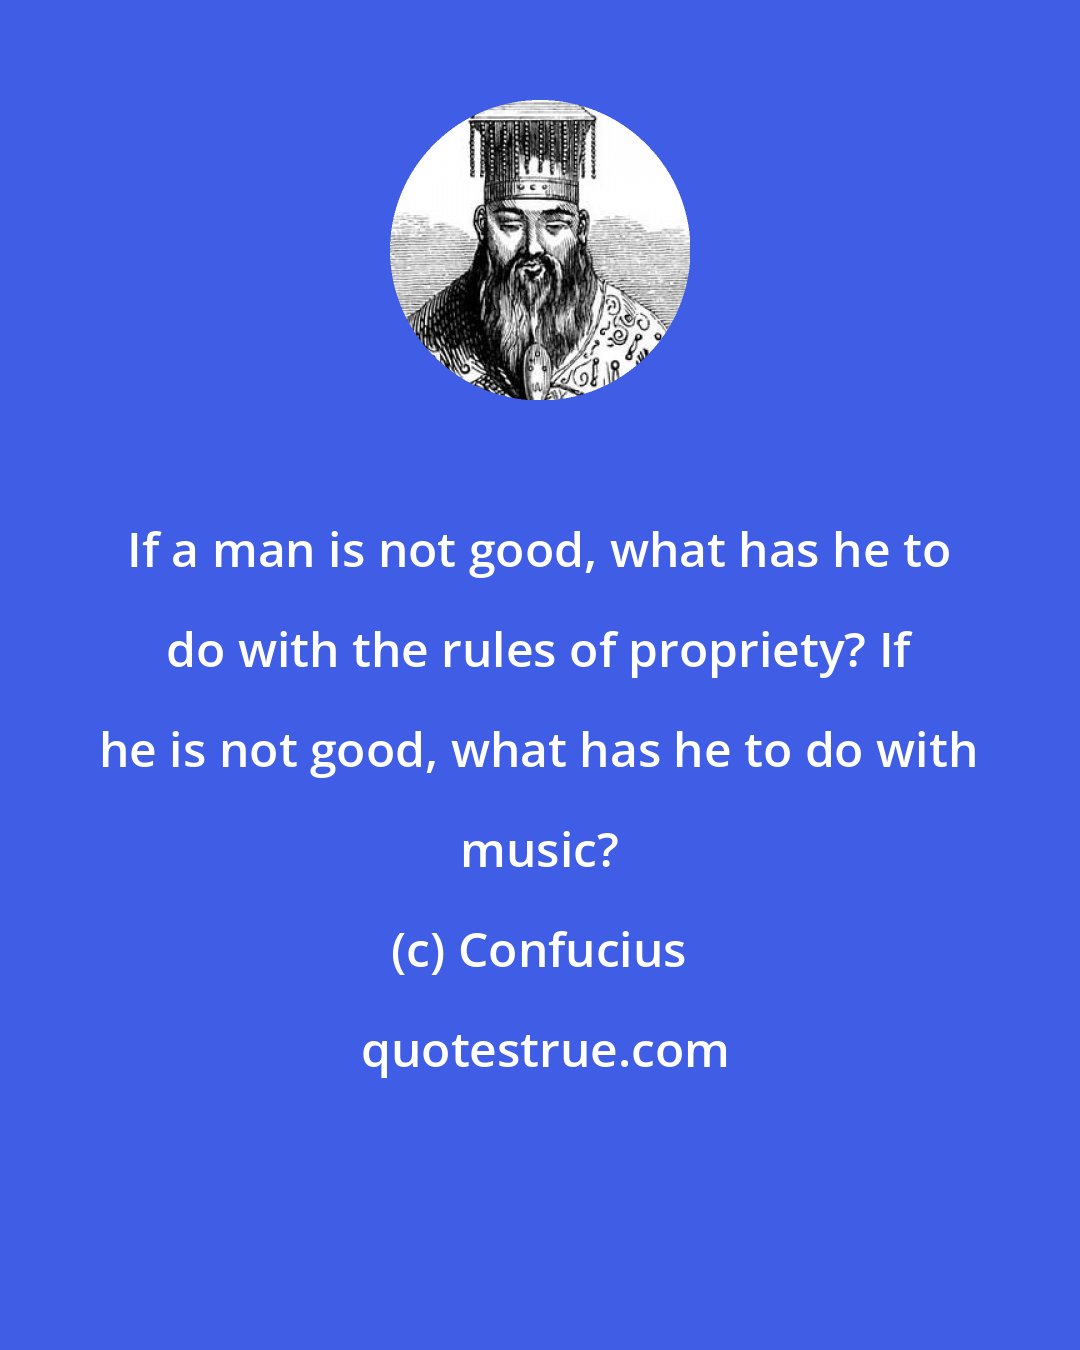 Confucius: If a man is not good, what has he to do with the rules of propriety? If he is not good, what has he to do with music?